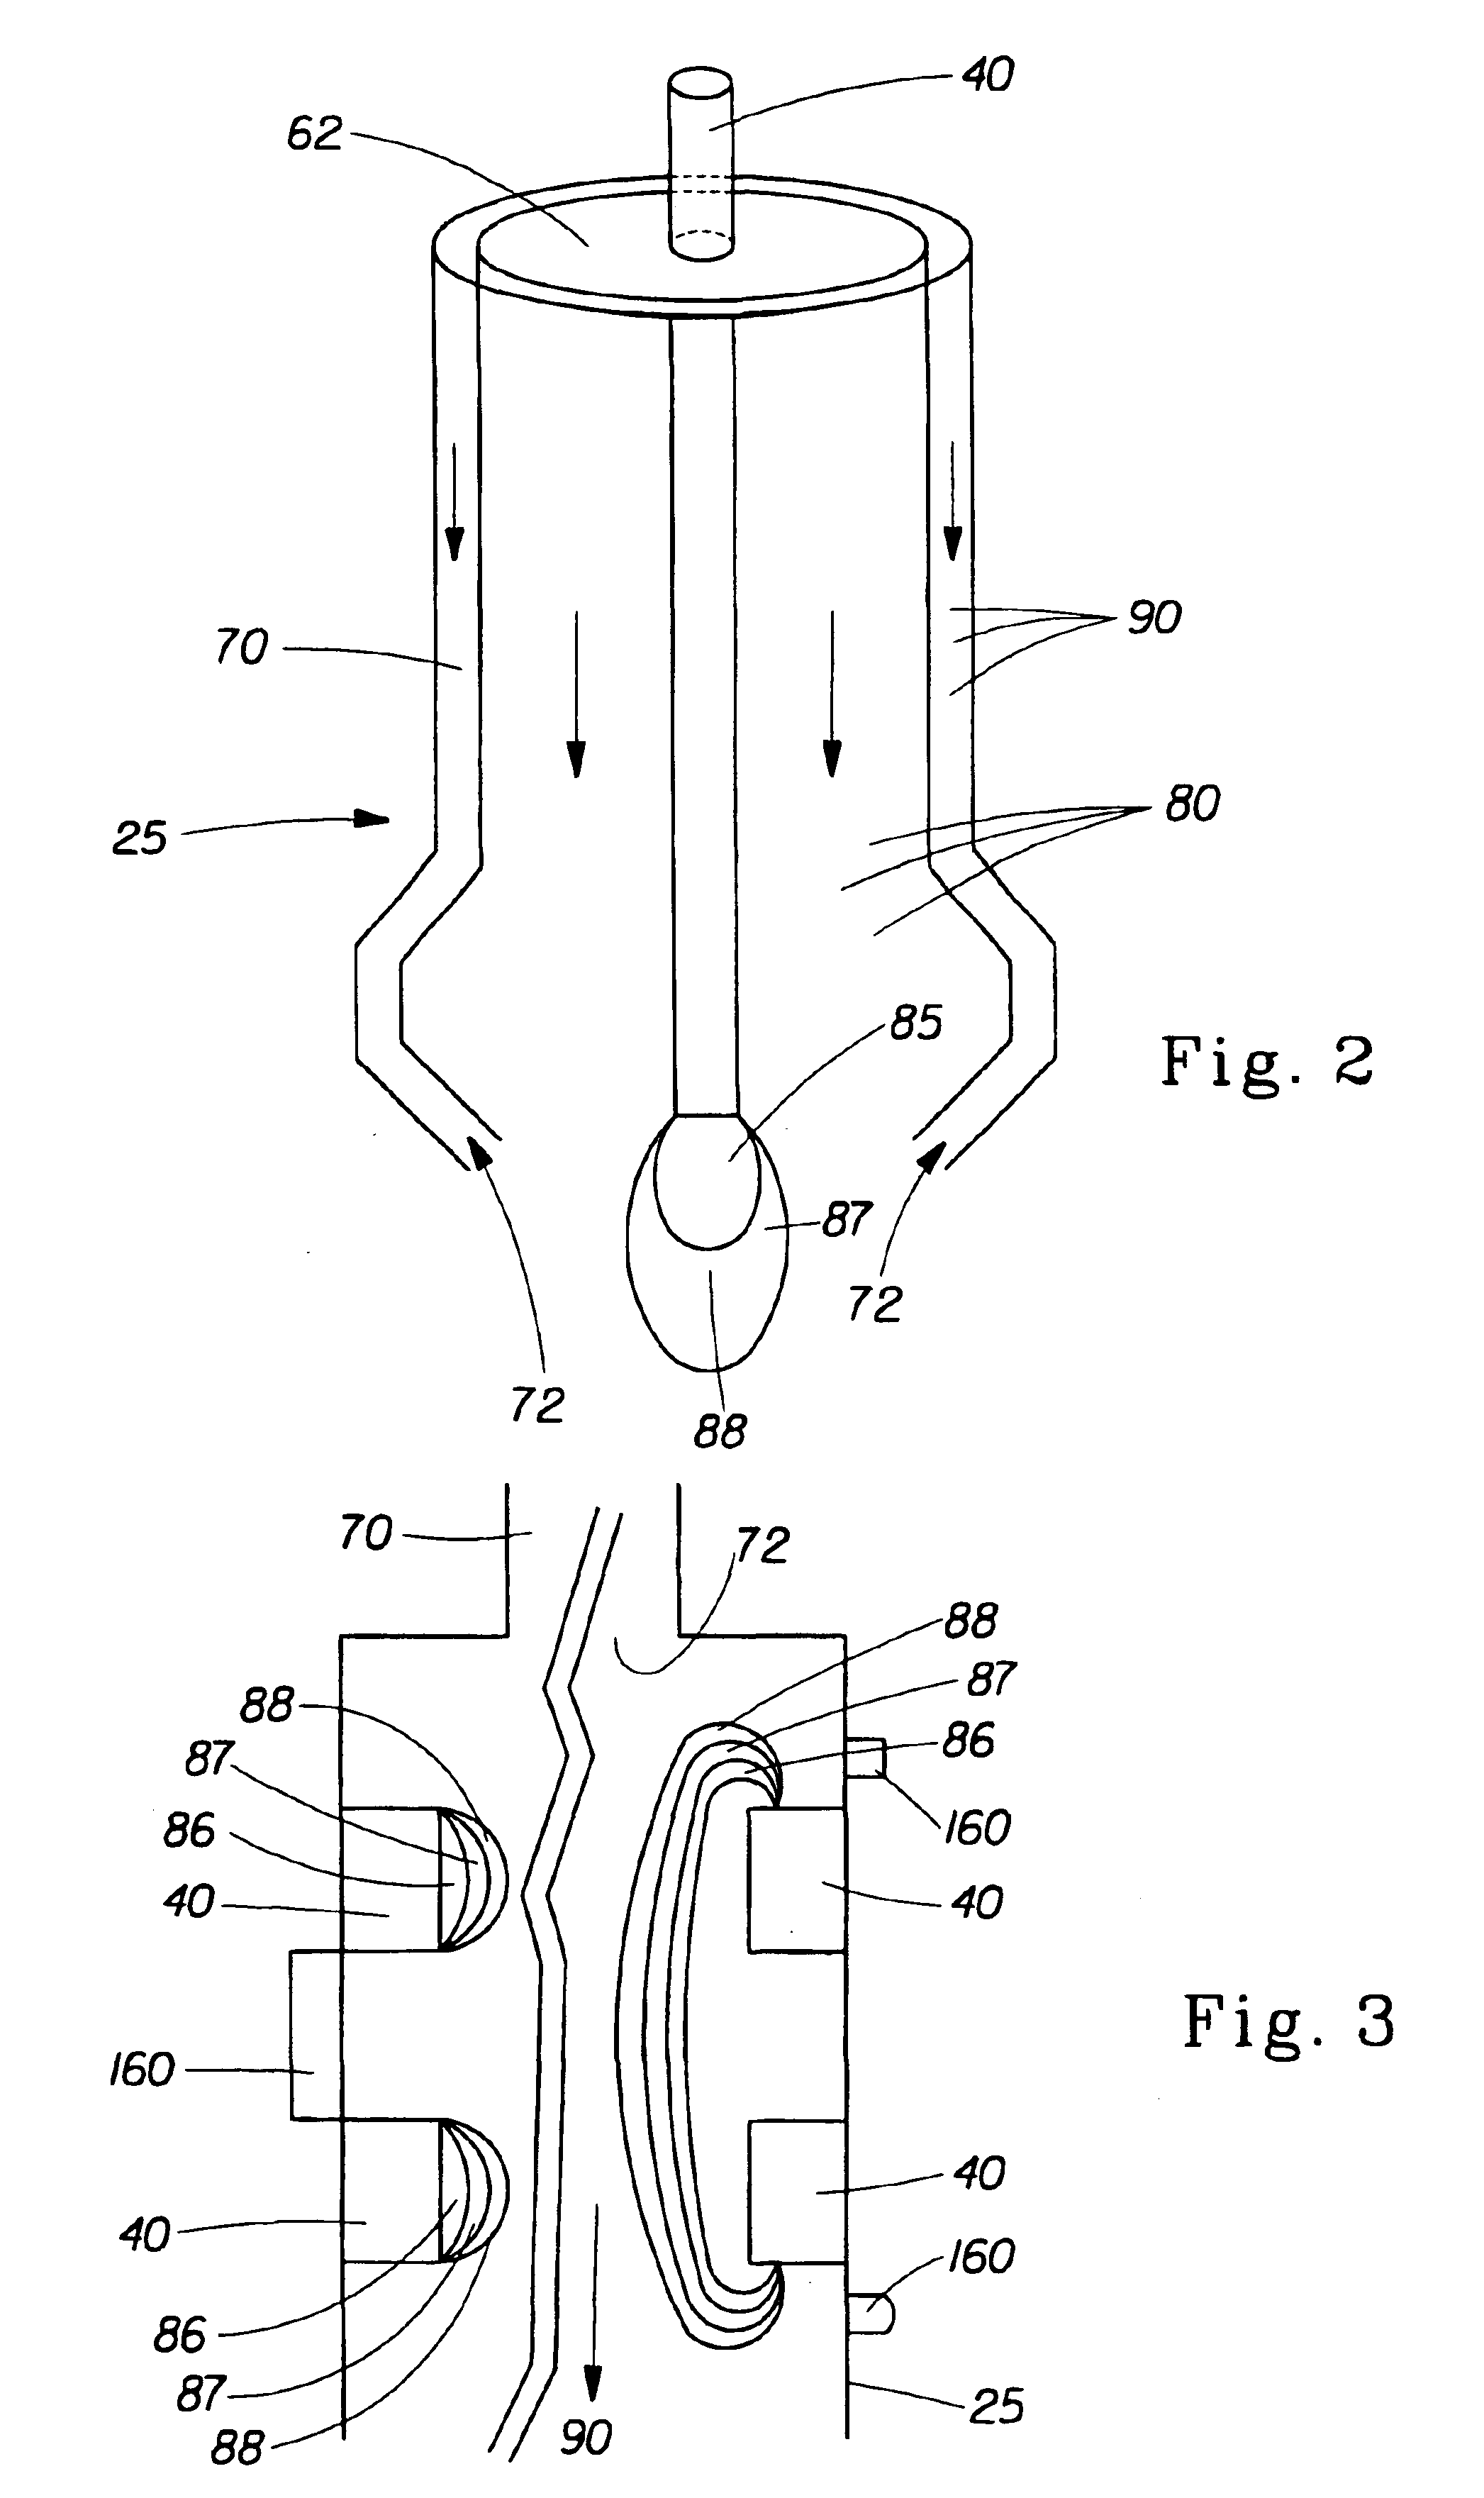 Apparatus and method for treating a workpiece using plasma generated from microwave radiation